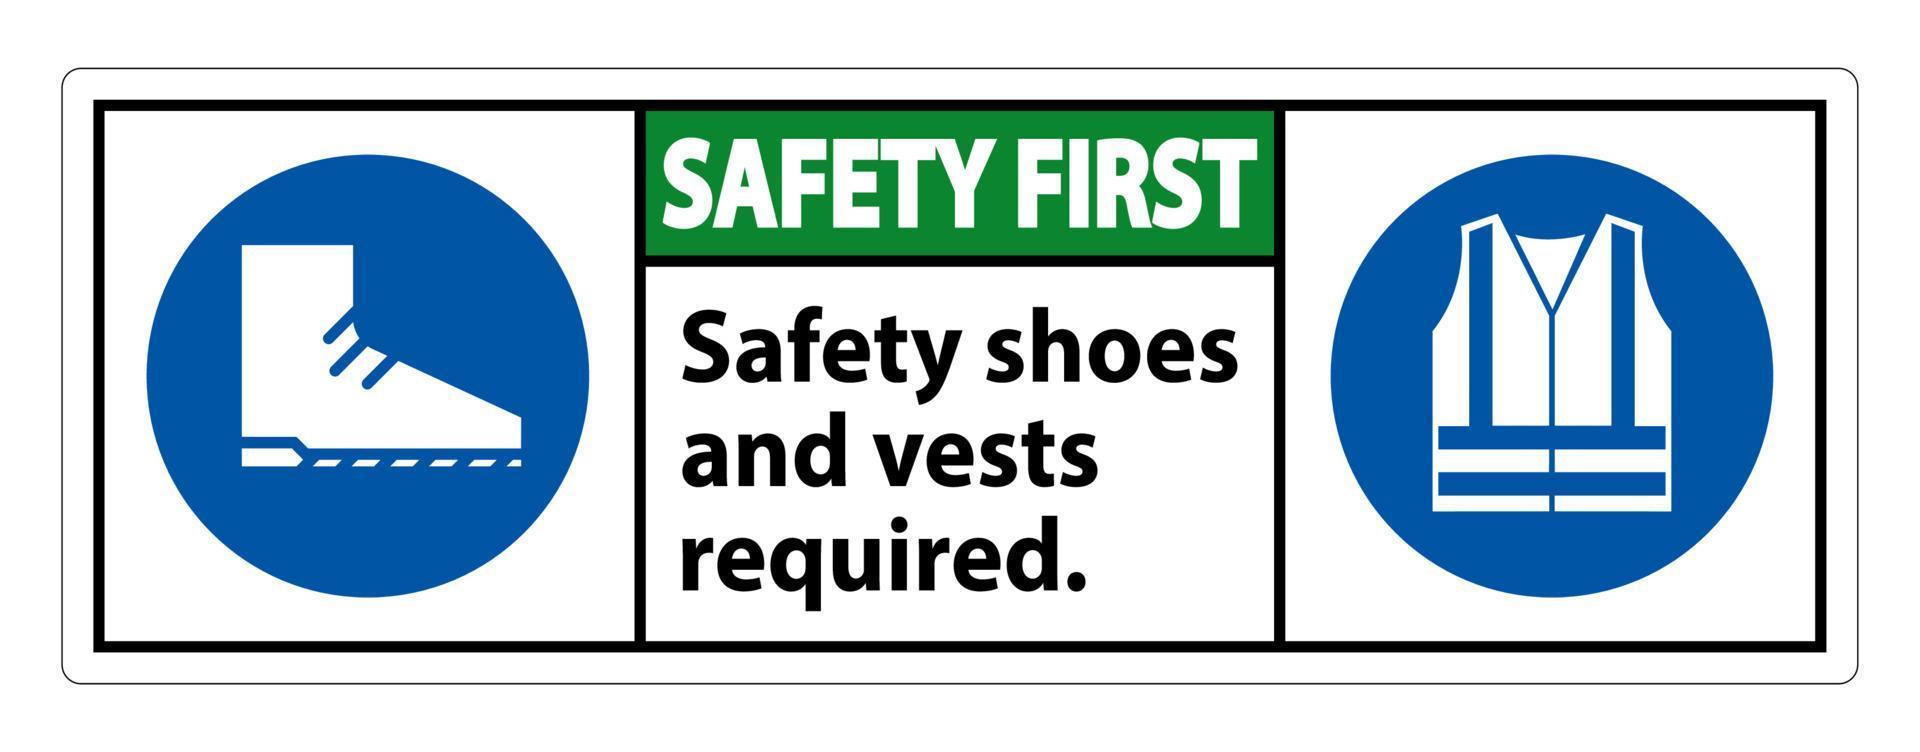 Safety First Sign Safety Shoes And Vest Required With PPE Symbols on White Background,Vector Illustration vector